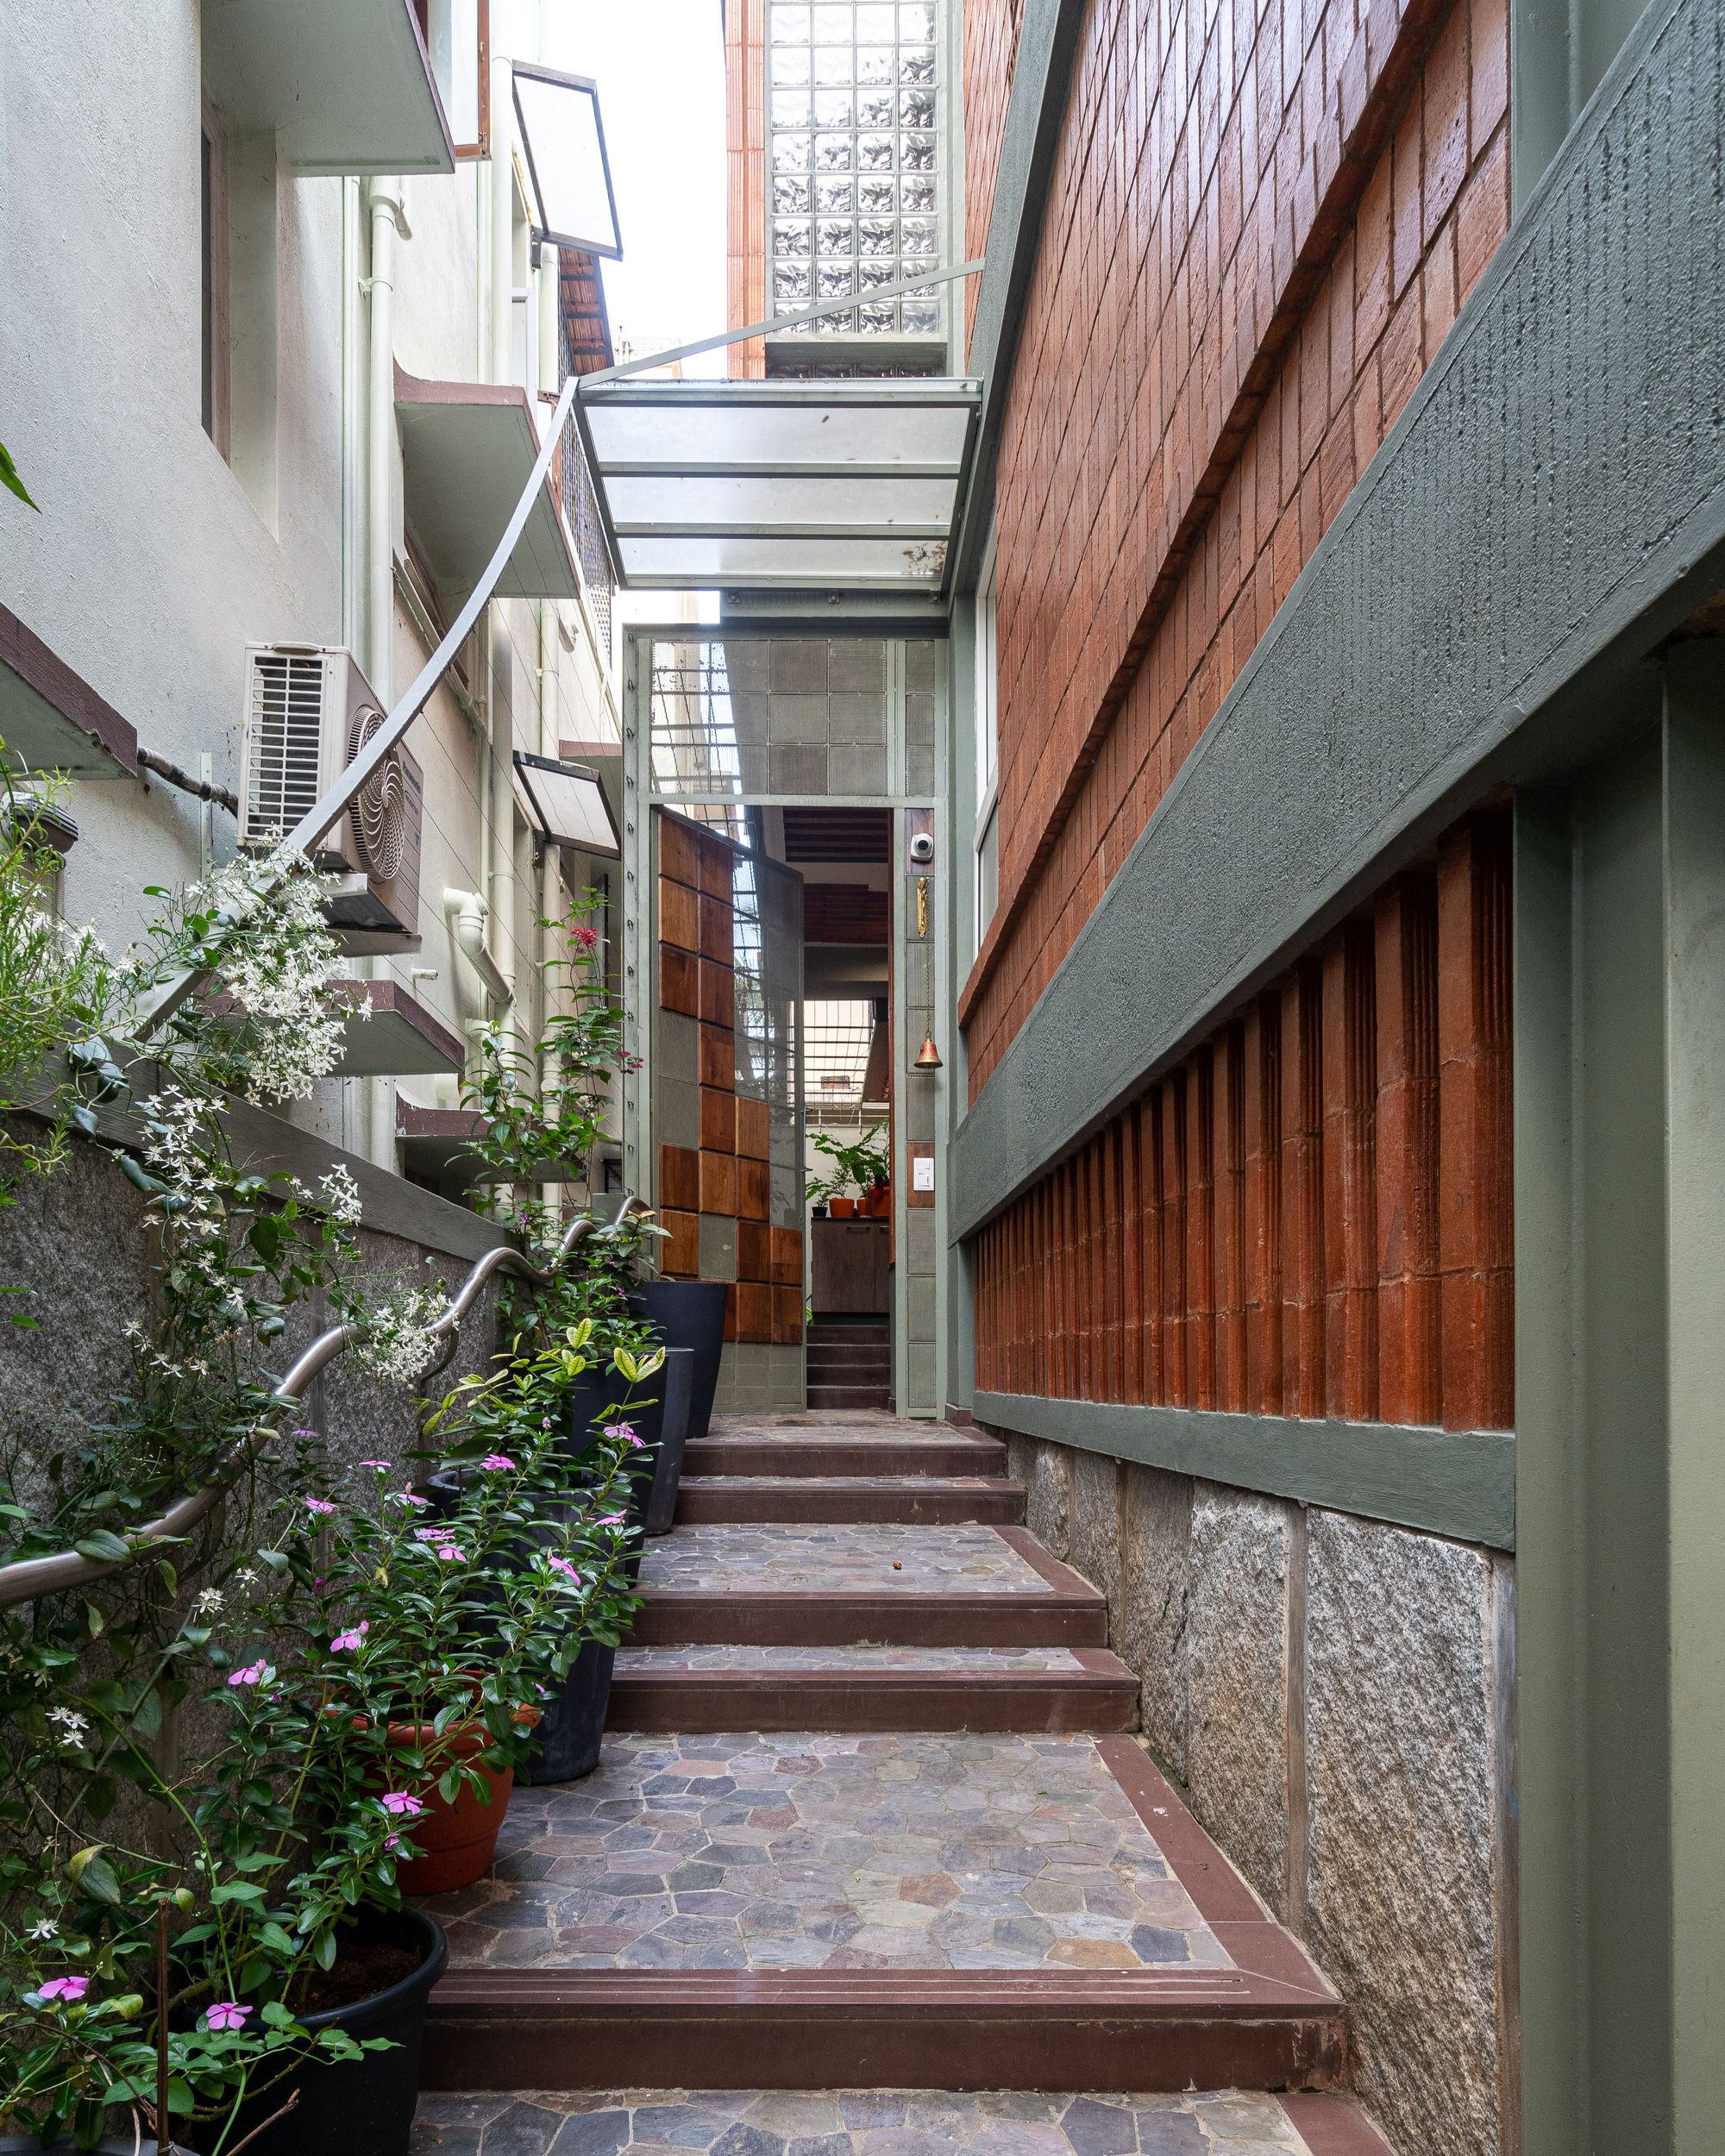 Shiva Stuthi Residence with Freedom, Peaceful Spaces by Wright Inspires